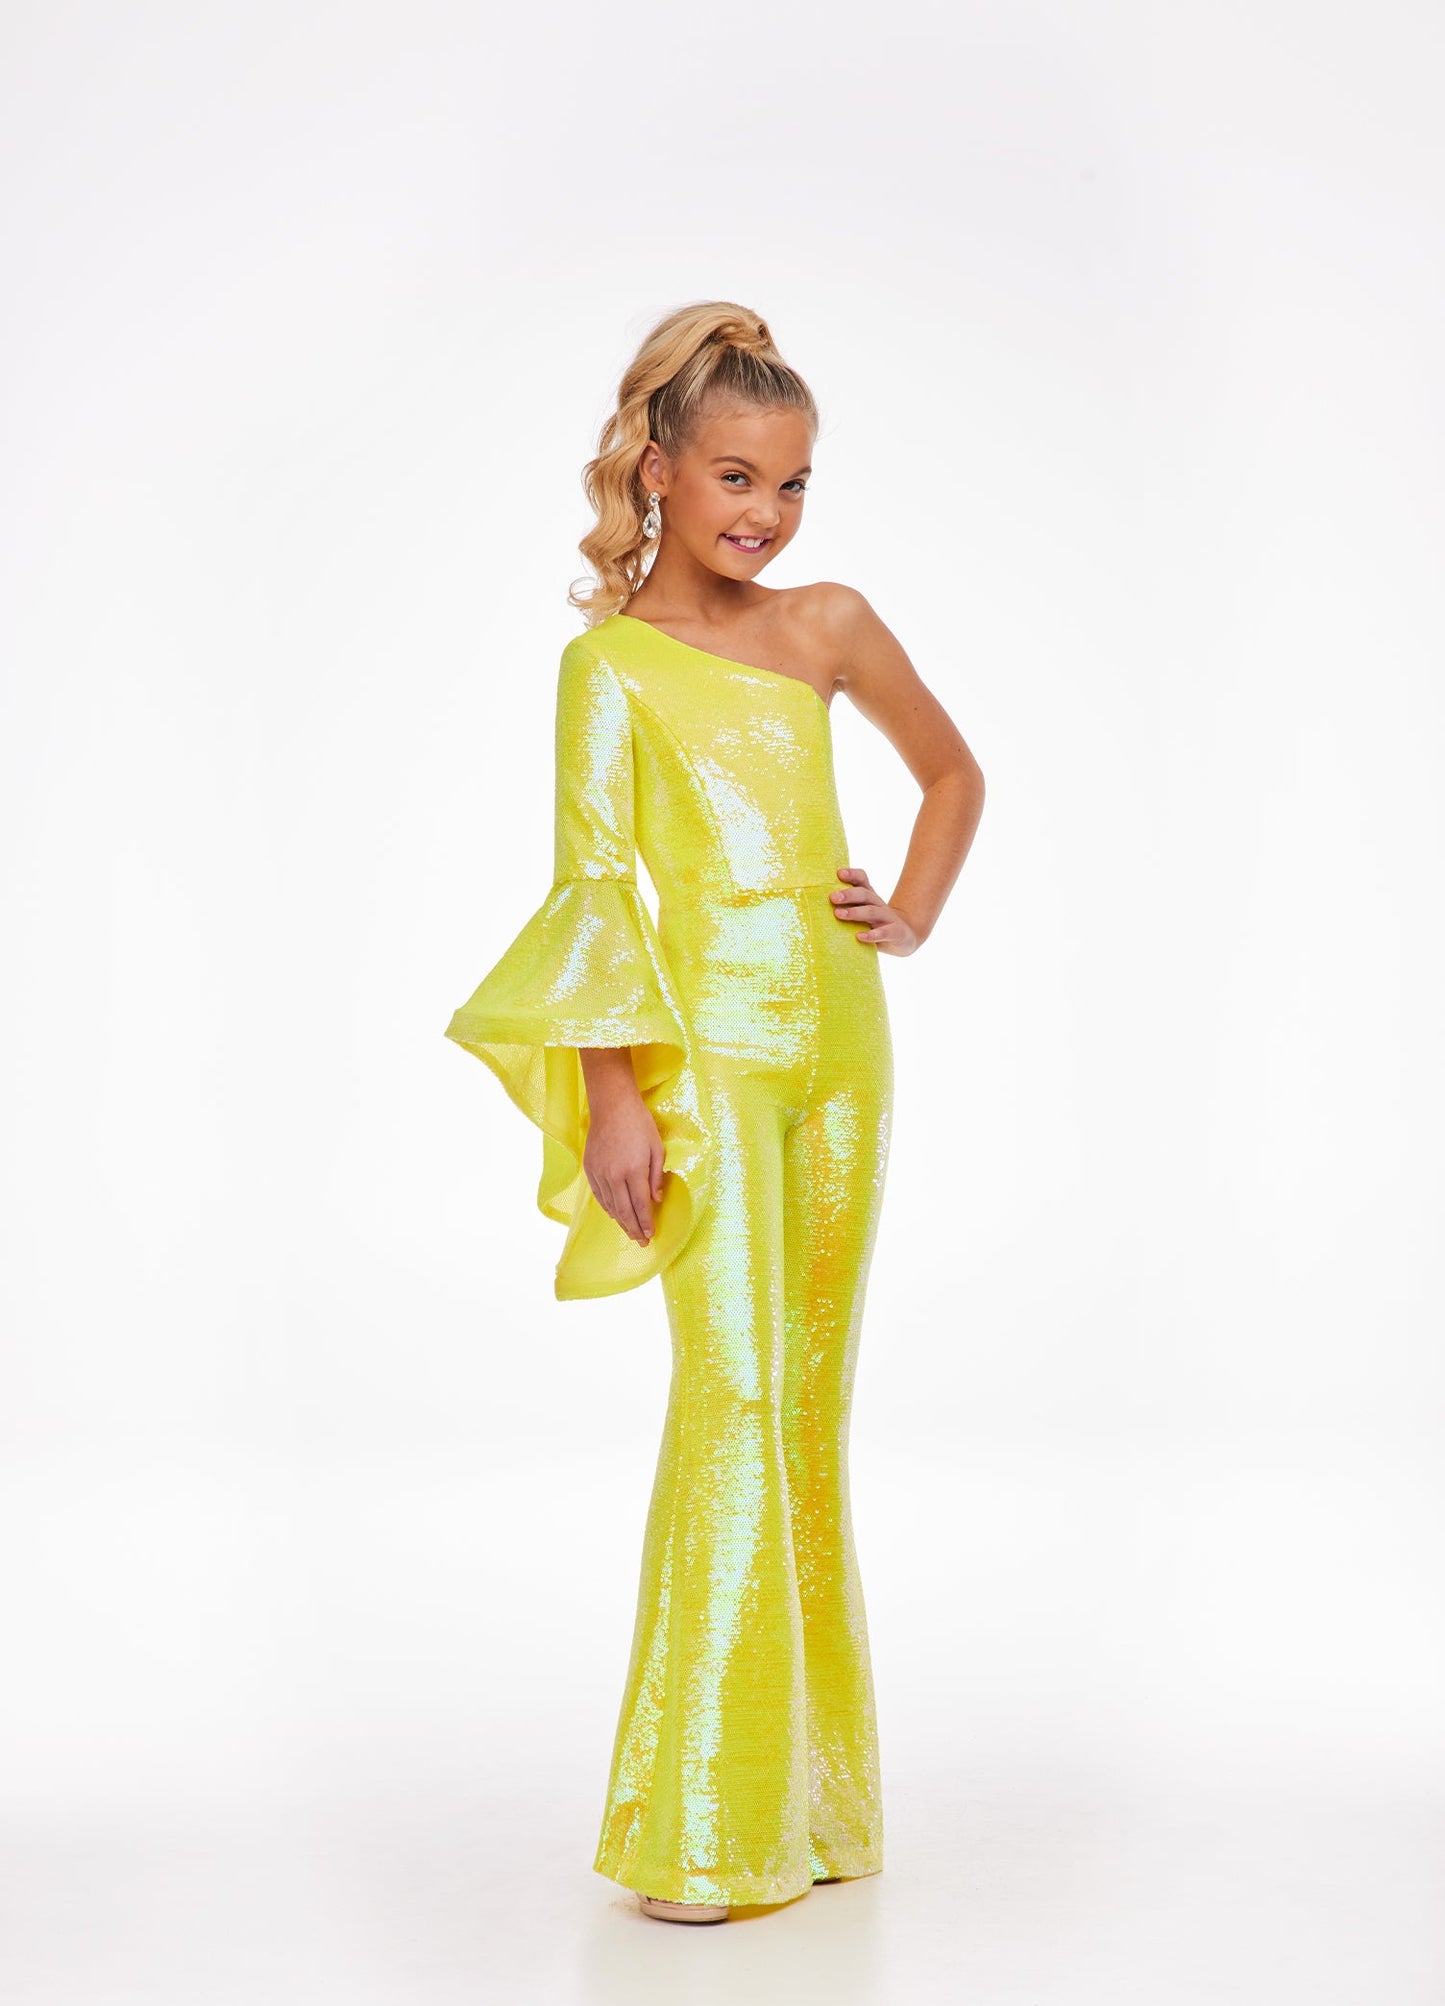 Ashley Lauren Kids 8110 One Shoulder Jumpsuit Long Bell Sleeve Sequin Pageant This groovy one shoulder jumpsuit features an oversized bell sleeve and flared pants. One Sleeve Oversized Bell Sleeve Sequin Fabric Jumpsuit Available Sizes: 2-16 Available Colors: Coral, Lilac, Yellow, Neon Green